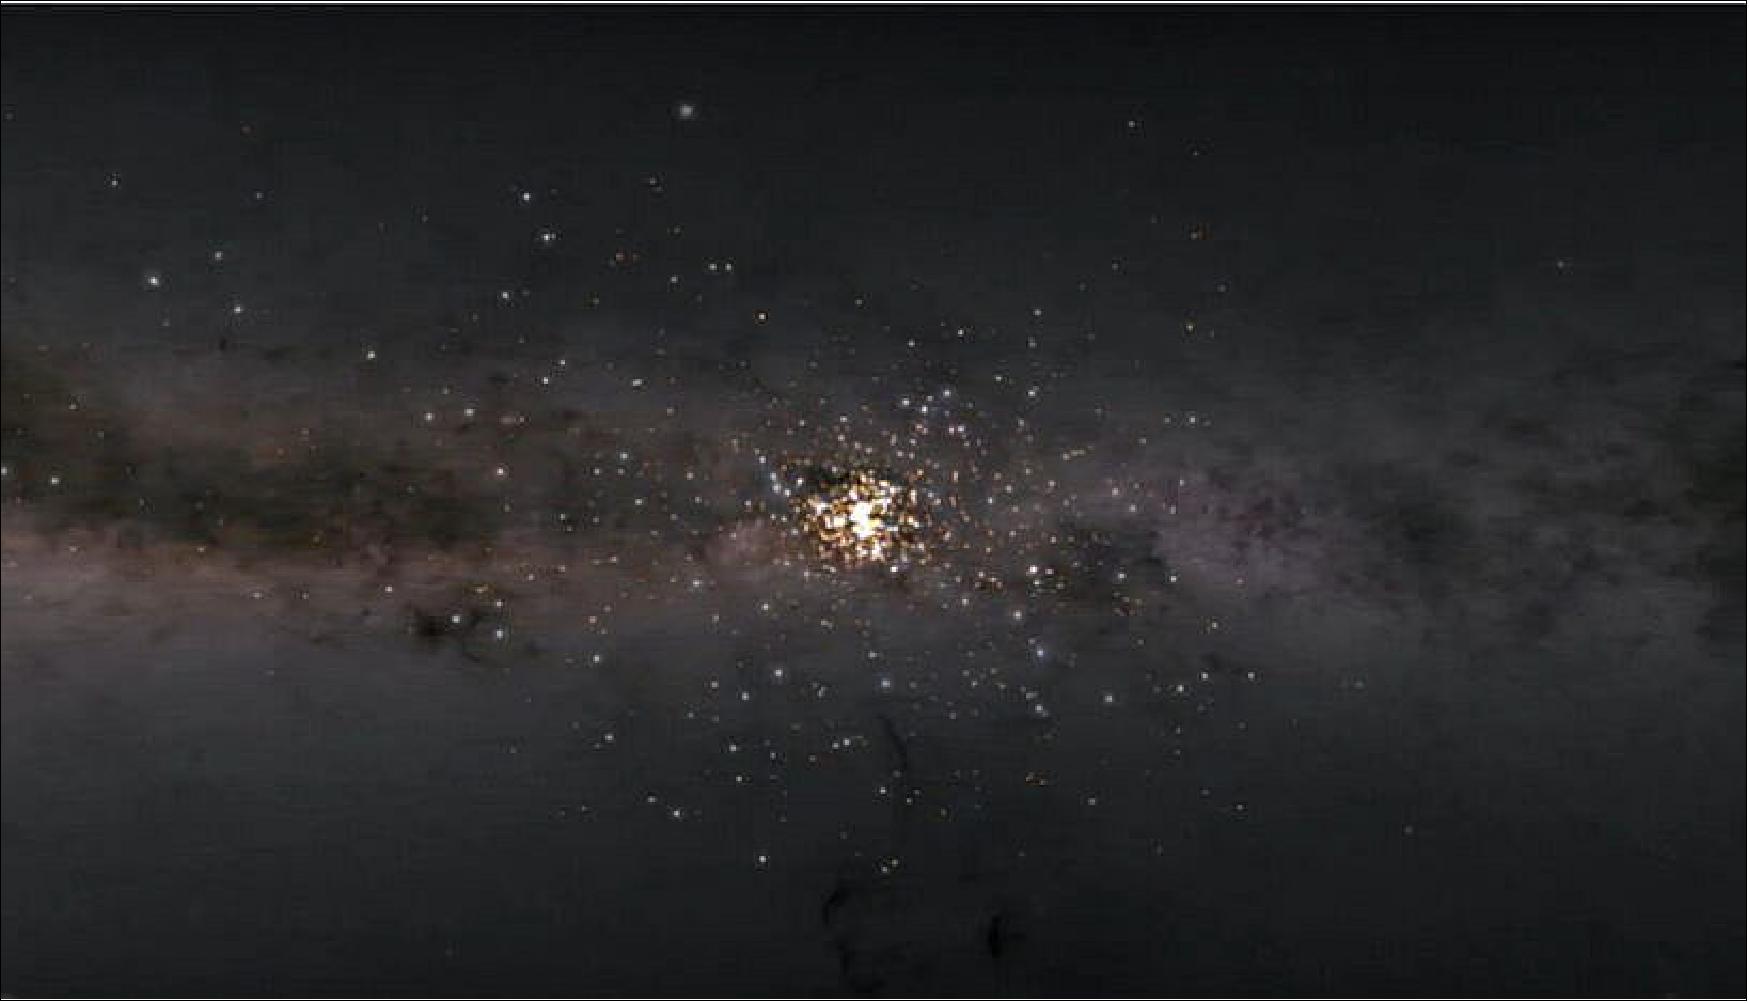 Figure 58: A panoramic view of the nearby Alpha Persei star cluster and its corona. The member stars in the corona are invisible. These are only revealed thanks to the combination of precise measurements with the ESA Gaia satellite and innovative machine learning tools (image credit: Stefan Meingast, made with Gaia Sky)